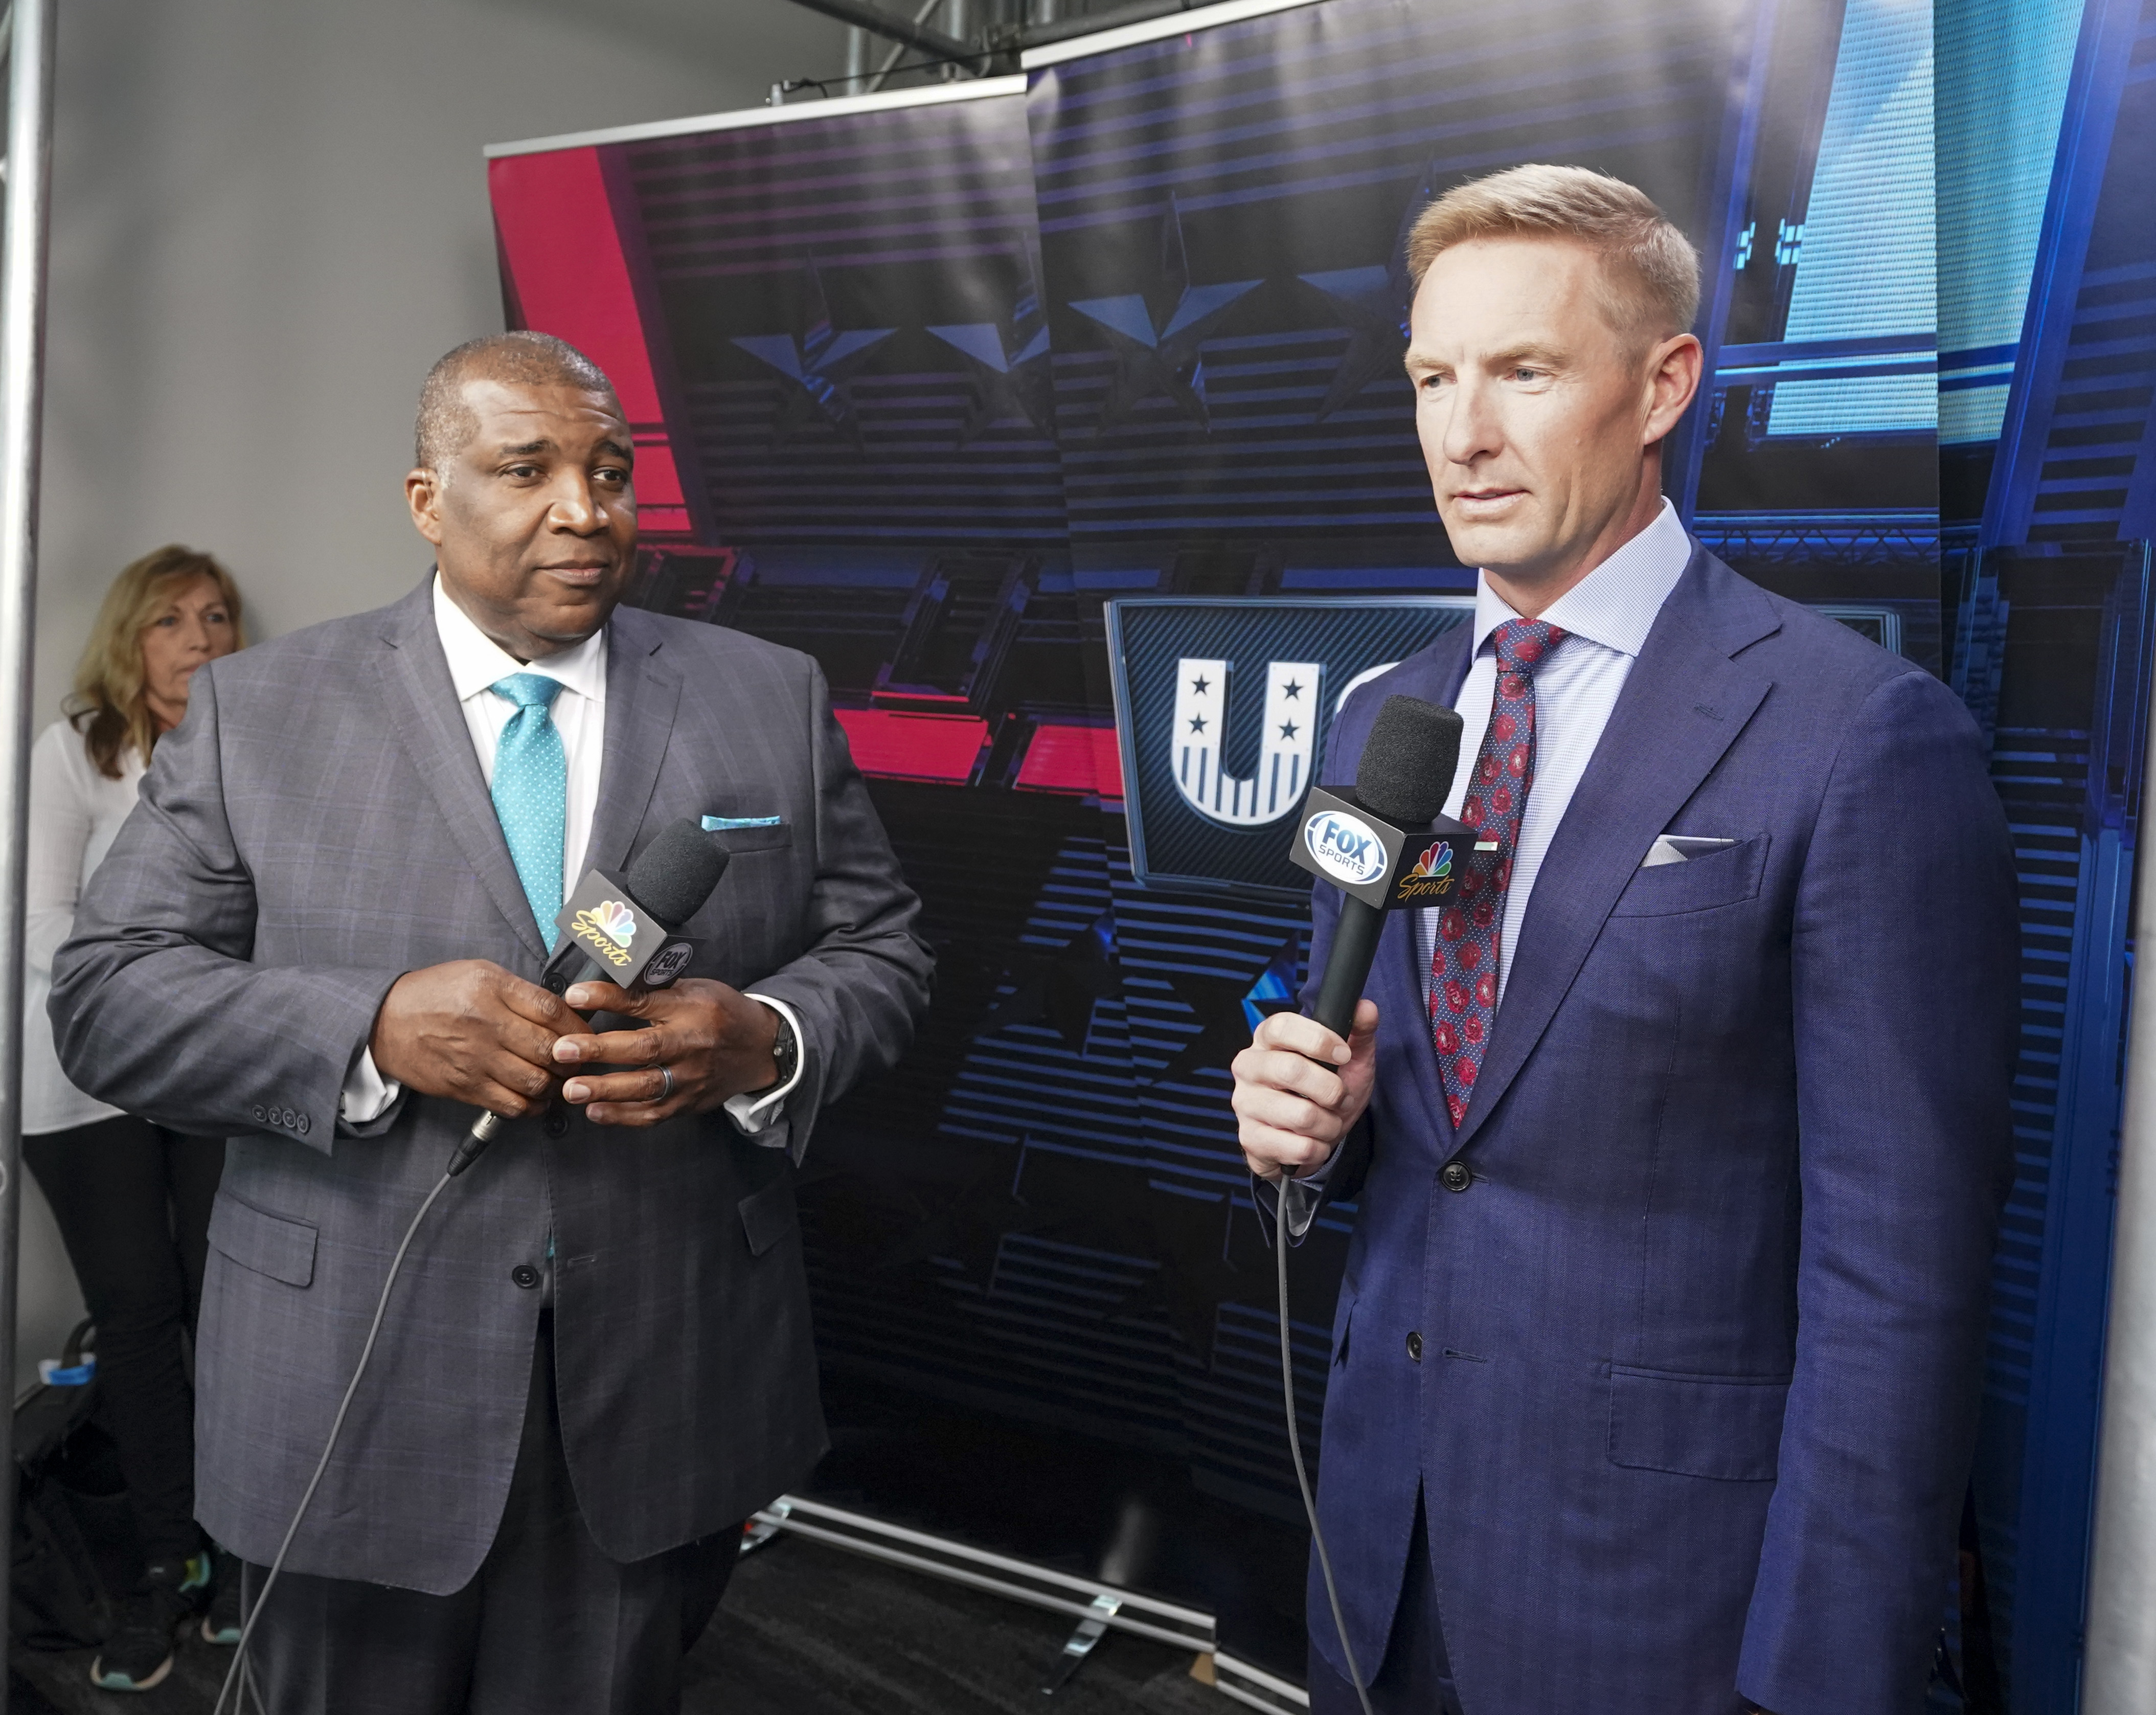 USFL Debut Reaches 3 Million Viewers Across Fox, NBC, and Peacock